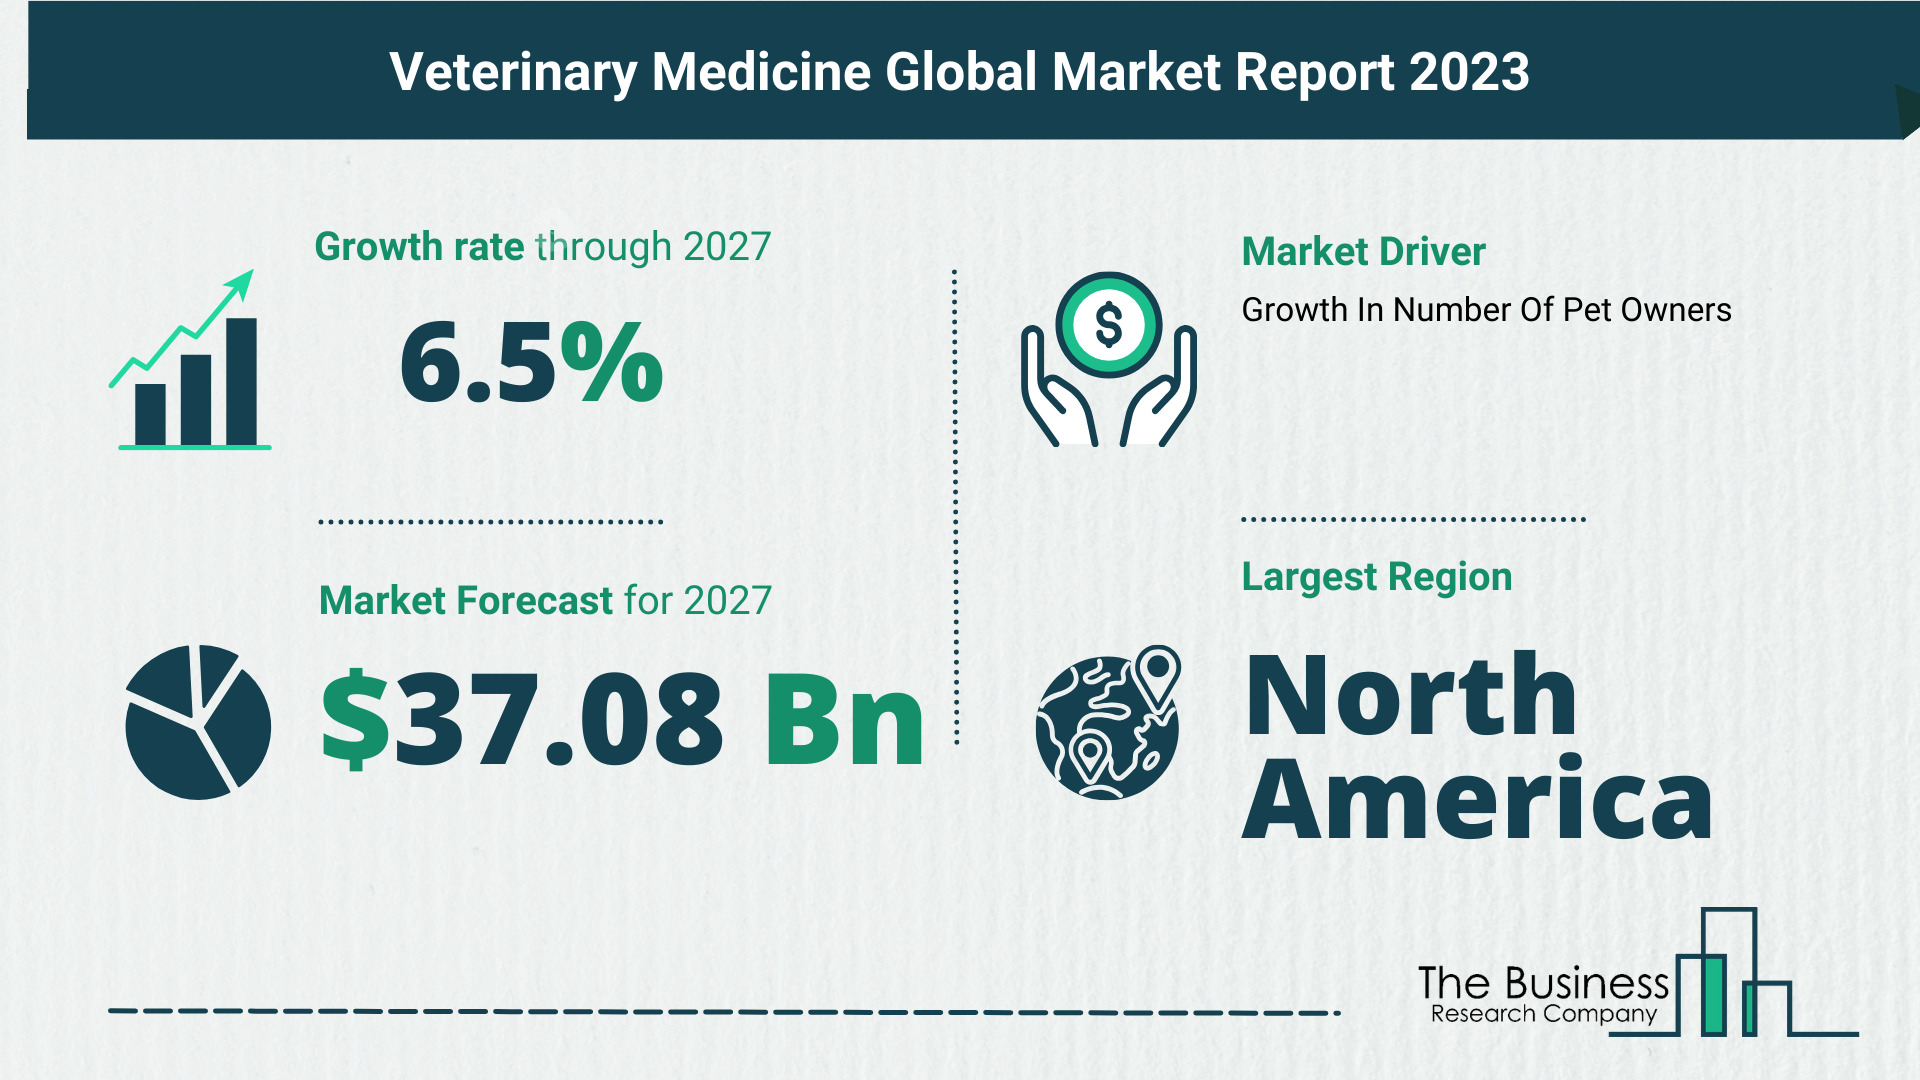 Key Takeaways From The Global Veterinary Medicine Market Forecast 2023